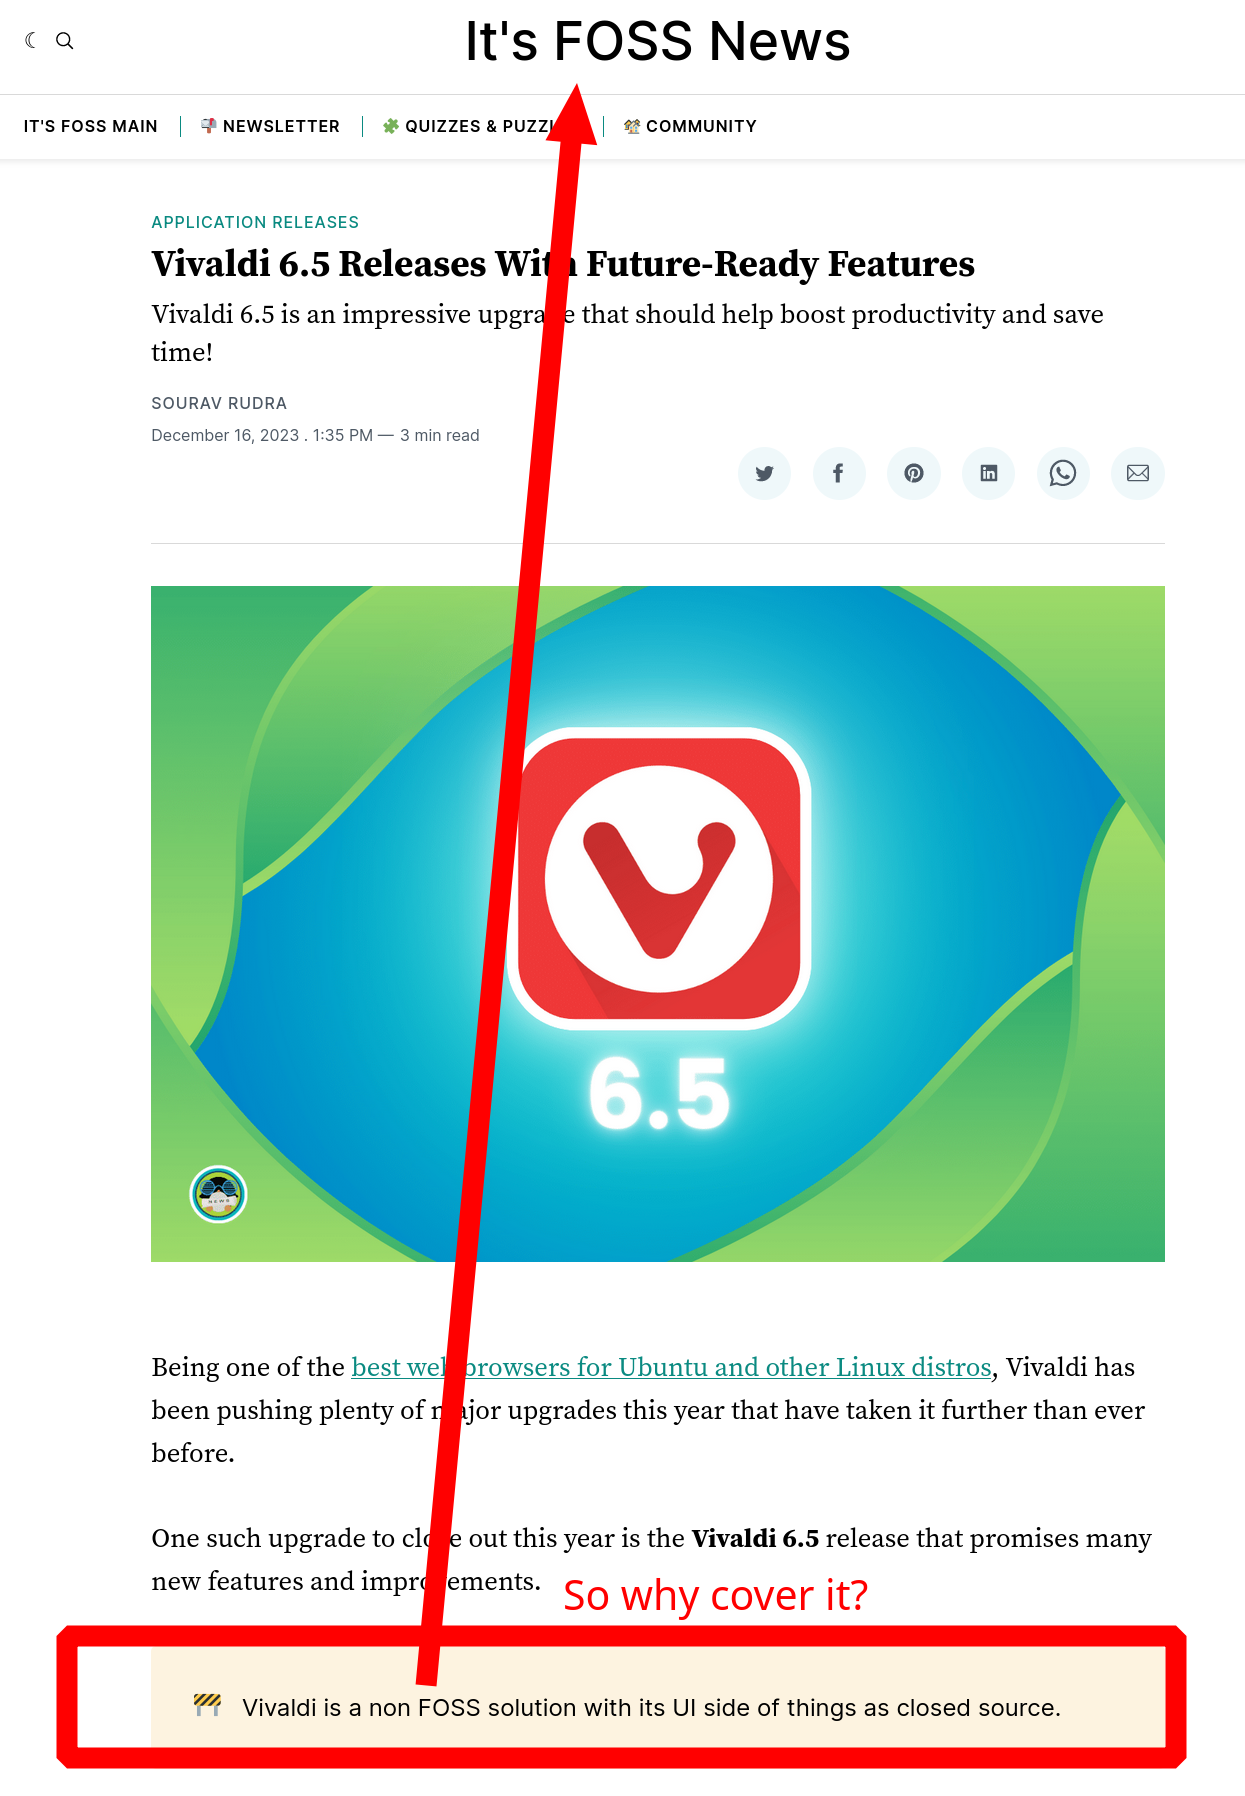 Vivaldi 6.5 Releases With Future-Ready Features: 'Vivaldi is a non FOSS solution with its UI side of things as closed source.' So why cover it?